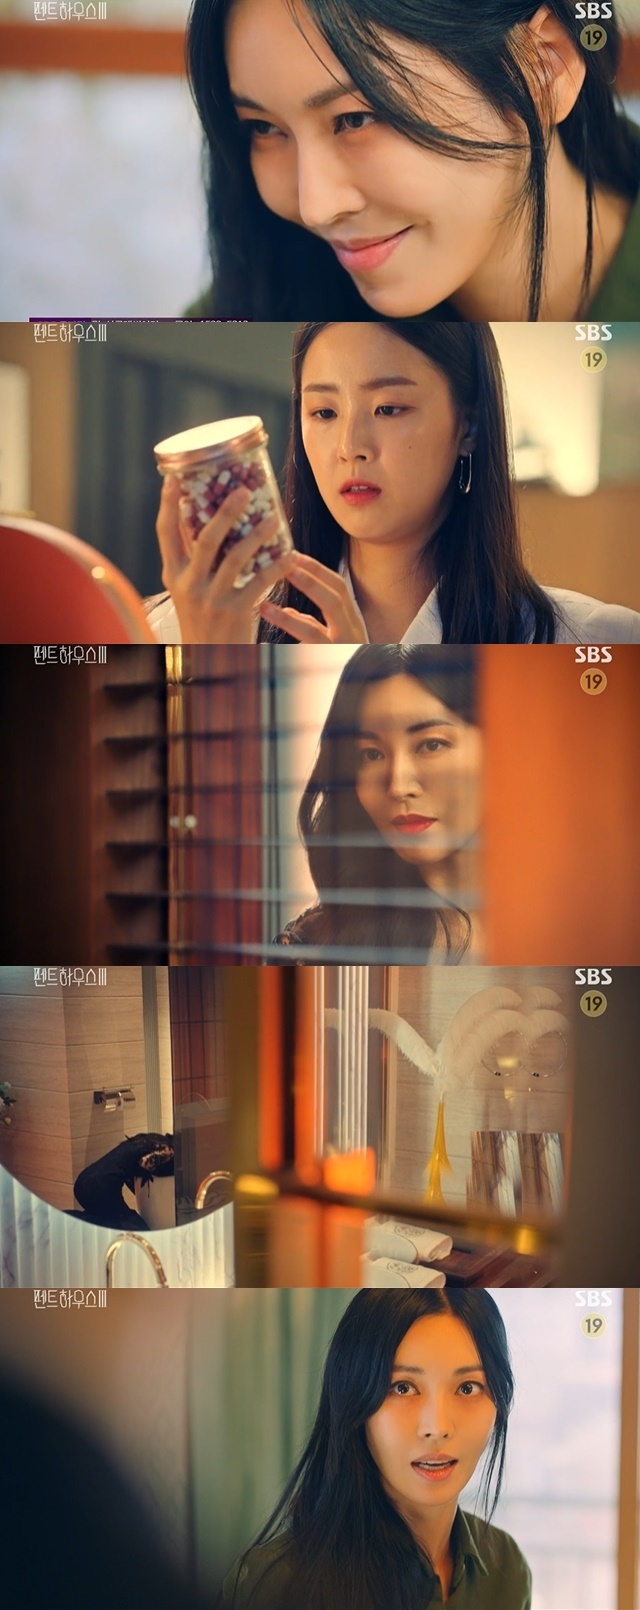 The symptoms of Kim So-yeons dementia were all Acting.In the 13th episode of SBS Friday Drama Penthouse 3 (playplayed by Kim Soon-ok, directed by Ju Dong-min), which was broadcast on September 3, the hidden secret of Chun Seo-jin (played by Kim So-yeon) was revealed.It was Chun Seo-jin who died in the last fight of Shim Soo-ryun (Lee Ji-ah) and Ju Dan-tae (Um Ki-jun) and benefited from the fishermens geography.Chun Seo-jin said, Is Logans Article 10 used in the end? He said, I finally disappeared.It was a death that suits you very much. Chun Seo-jin then met with Do secretary (Kim Do-hyun) and ordered, Shim training will be watching my every move, so I should not act suspiciously.Dovish reported to Chun Seo-jin that you do not have to take any more debts, you will not be allowed to leave the country. Chun Seo-jin said, Proceed with the abandonment process today.Is it always helping me like this? Chun Seo-jin said, Is this (Choi Ye-bin) did not notice? In front of Is this, keep your mind straight and watch your mouth.I do not know what to do with betrayal if I know that I did not take the medicine because I am sensitive. When I tried to feed myself with memory-scavenging constraints, I also revealed that I did not eat it.Chun Seo-jin noticed the intention of HAEUN star and ran to the bathroom while he went to get a picture of Has this and vomited all the wine he drank.